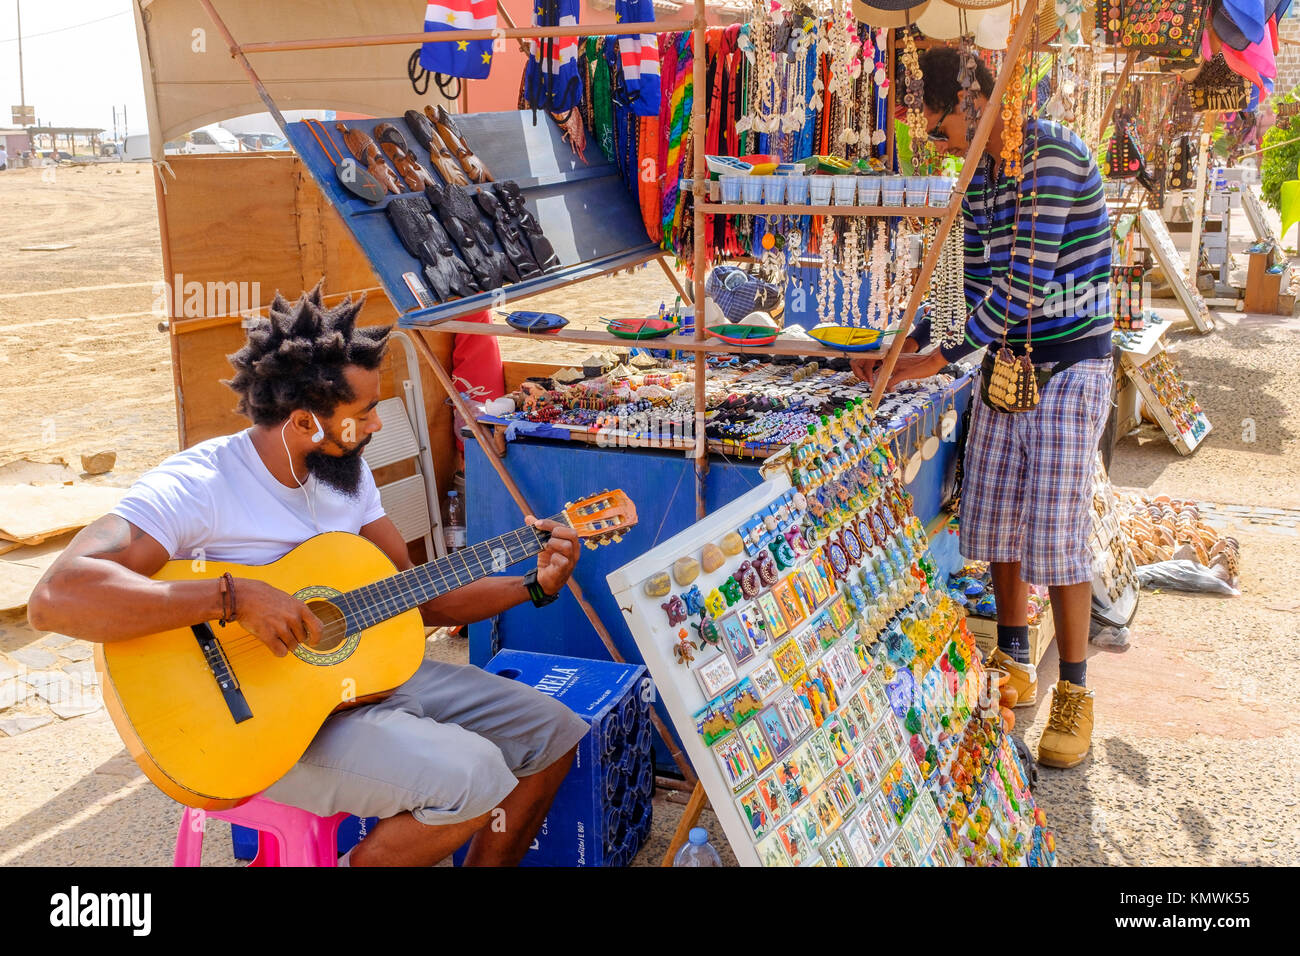 Tourist looking at souvenirs at a gift stall in Santa Maria, Sal, Cape Verde while the stallholder players his guitar Stock Photo